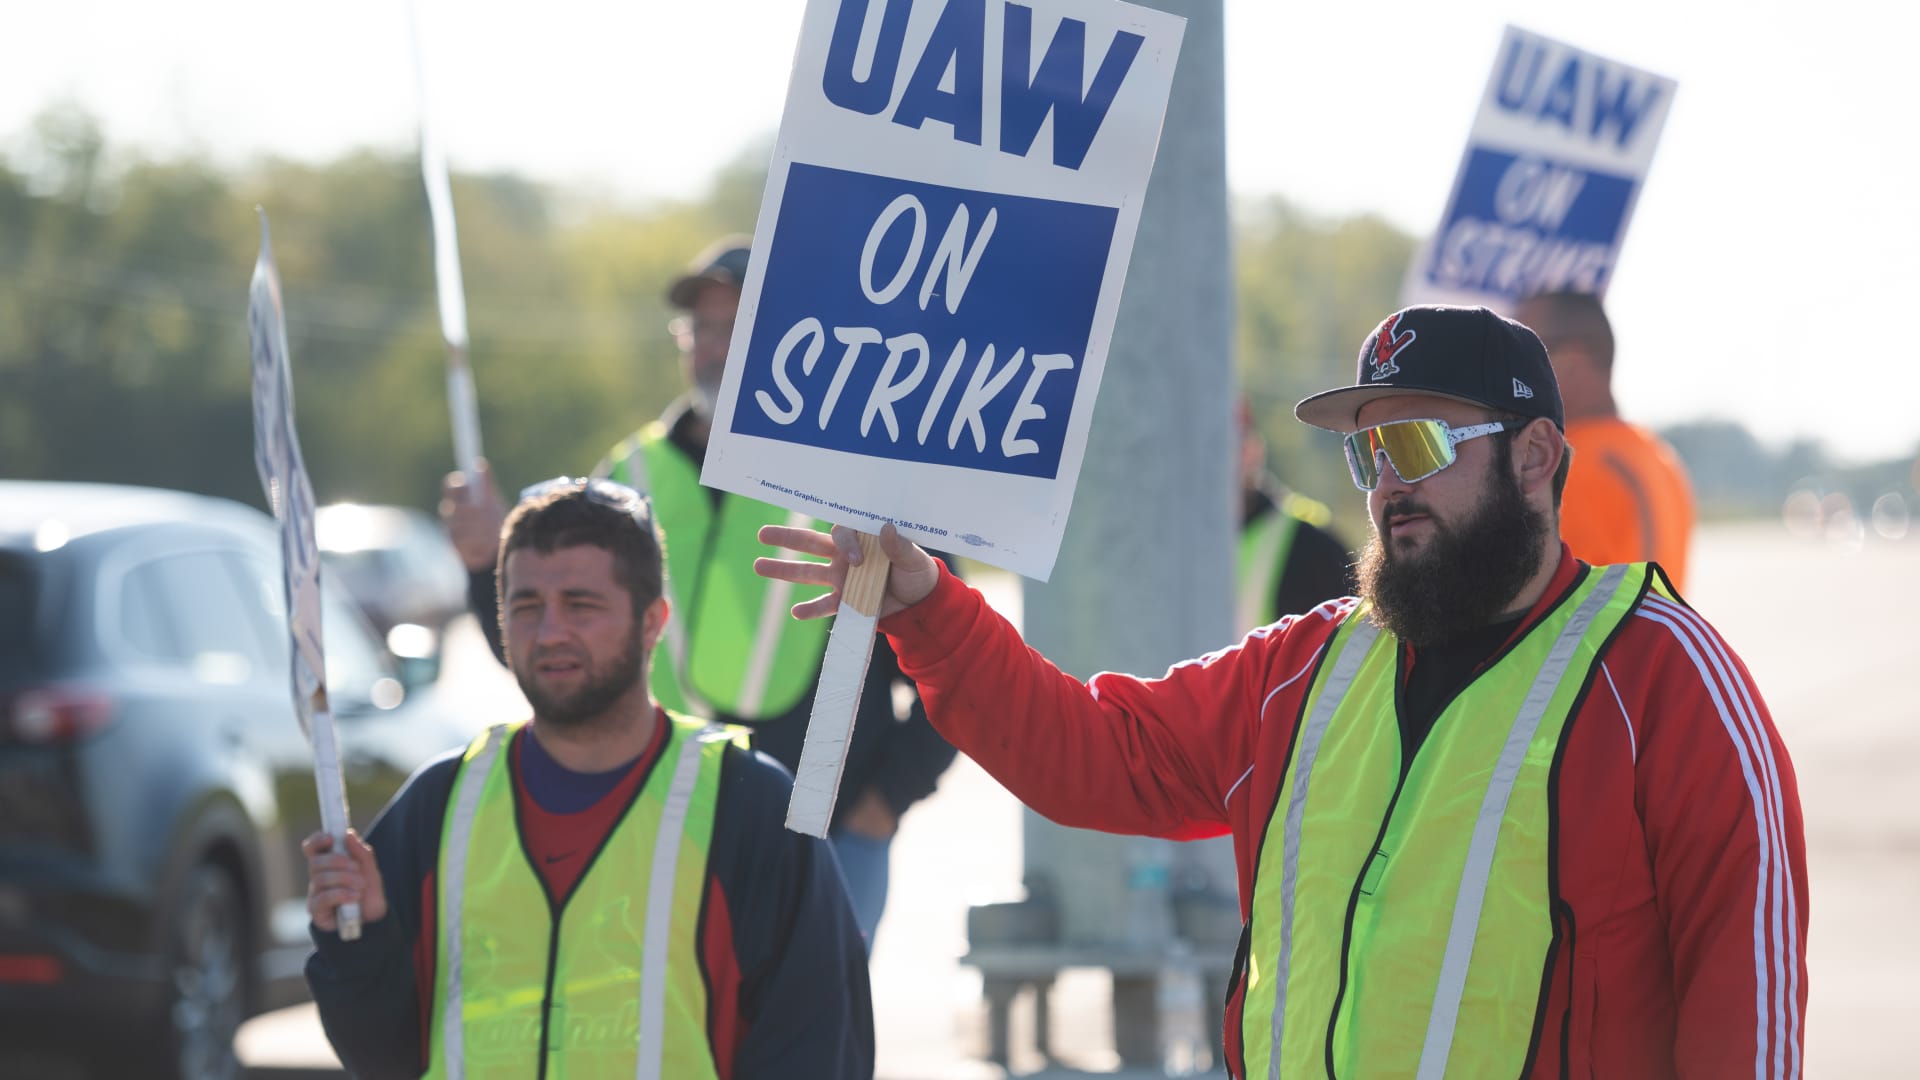 How Tesla is on the heart of the UAW strikes